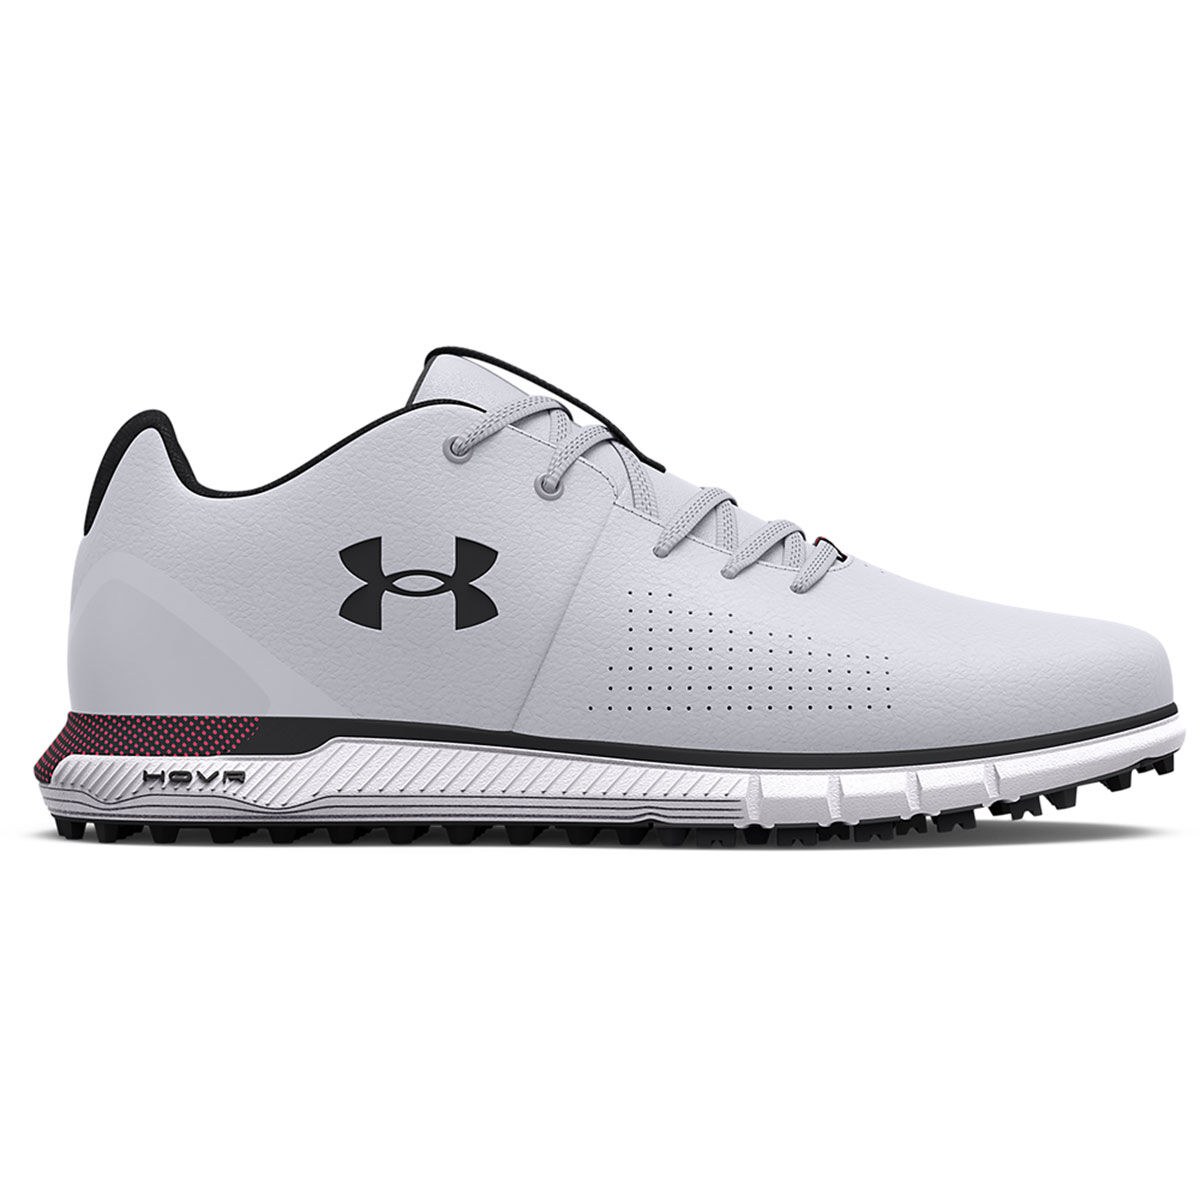 Under Armour Mens Grey and Black HOVR Fade 2 Wide Golf Shoes, Size: 7 | American Golf